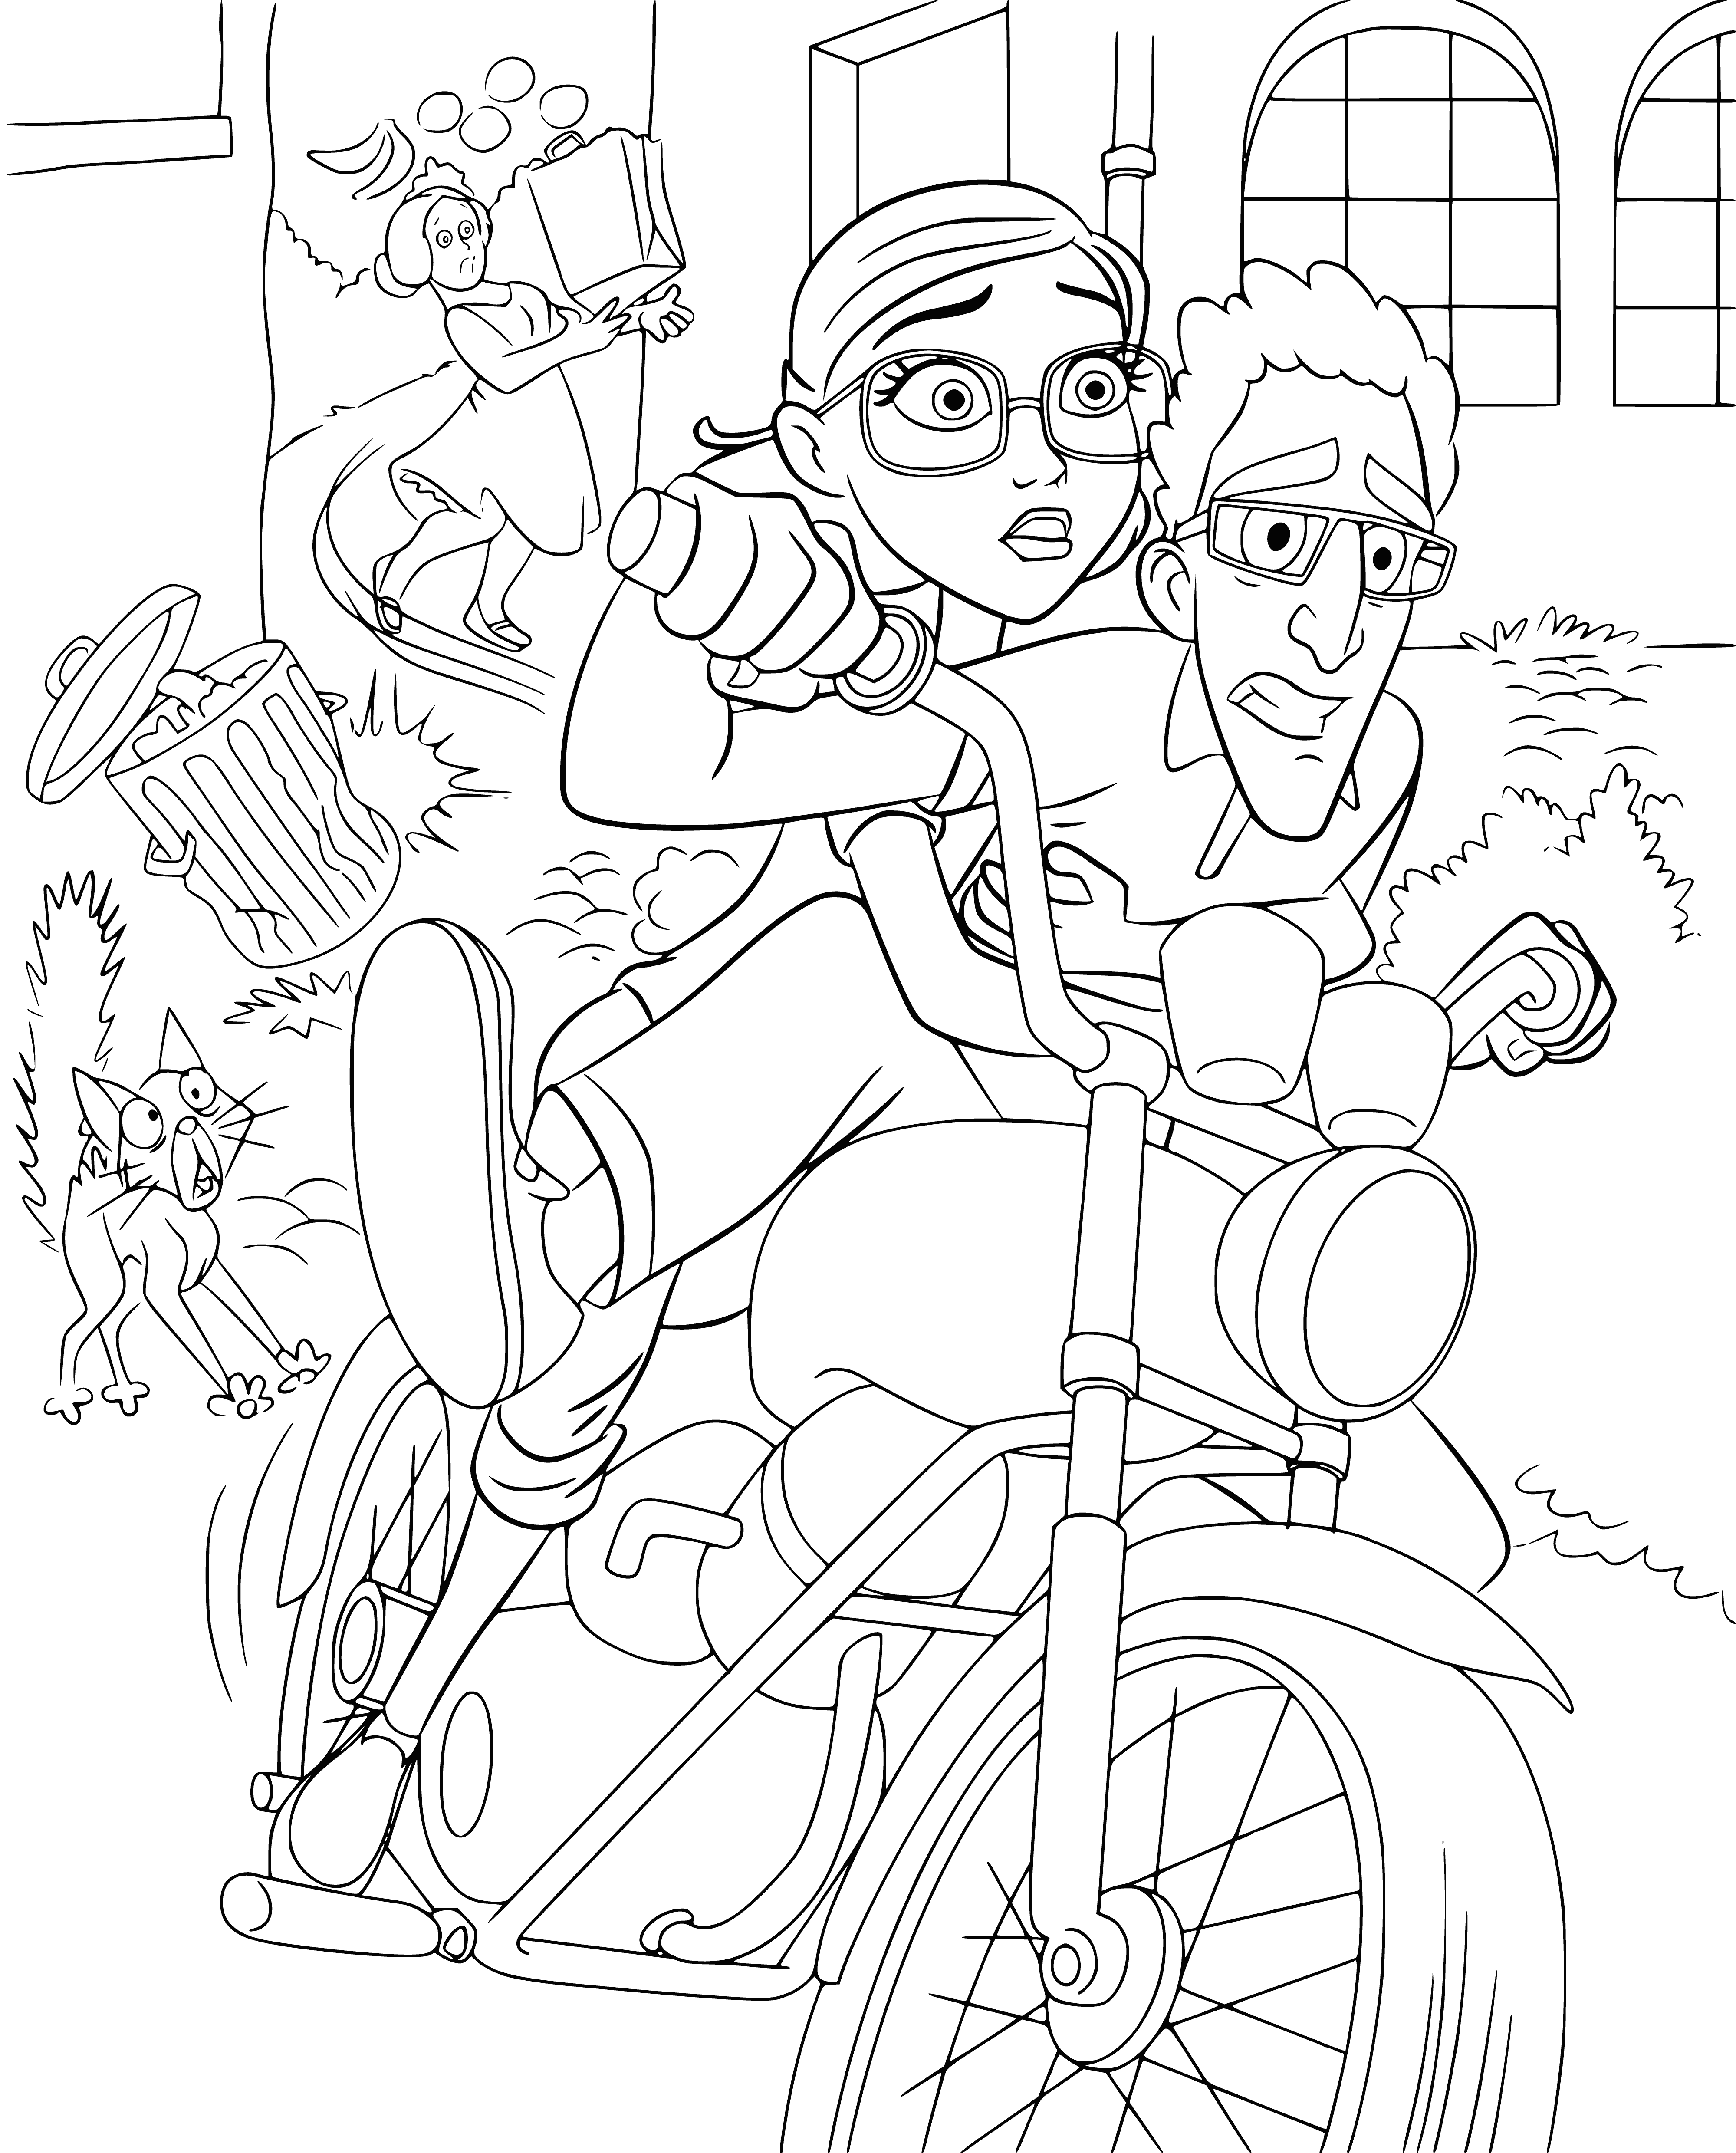 coloring page: Zoom around town with the lightweight scooter Crazy Speed Rio - zipping through traffic and alleys easily!